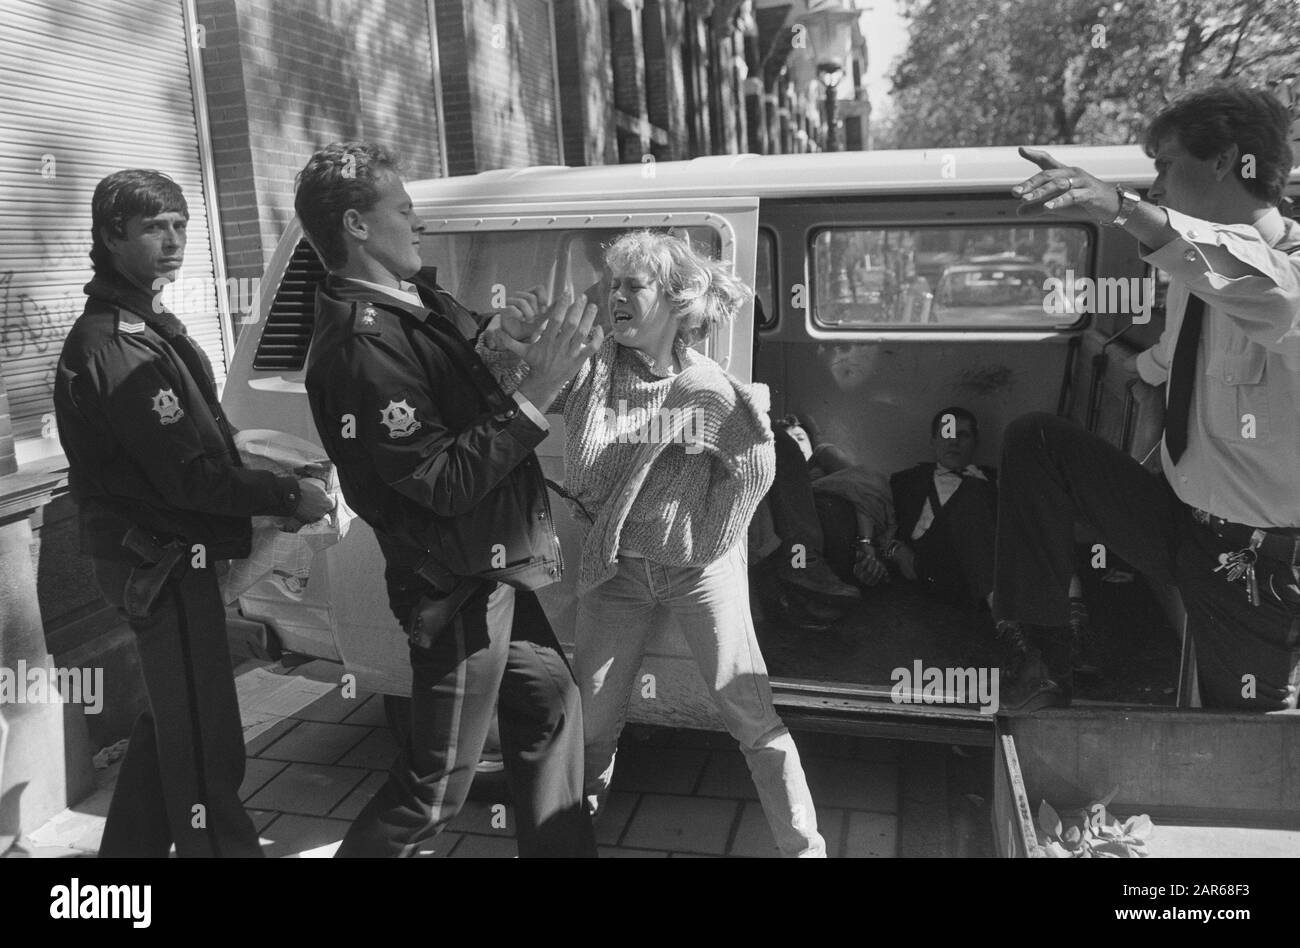 Krakers Conradstraat are removed by police from PVDA office Date: September 14, 1987 Keywords: KRAKERS, POLICE Stock Photo